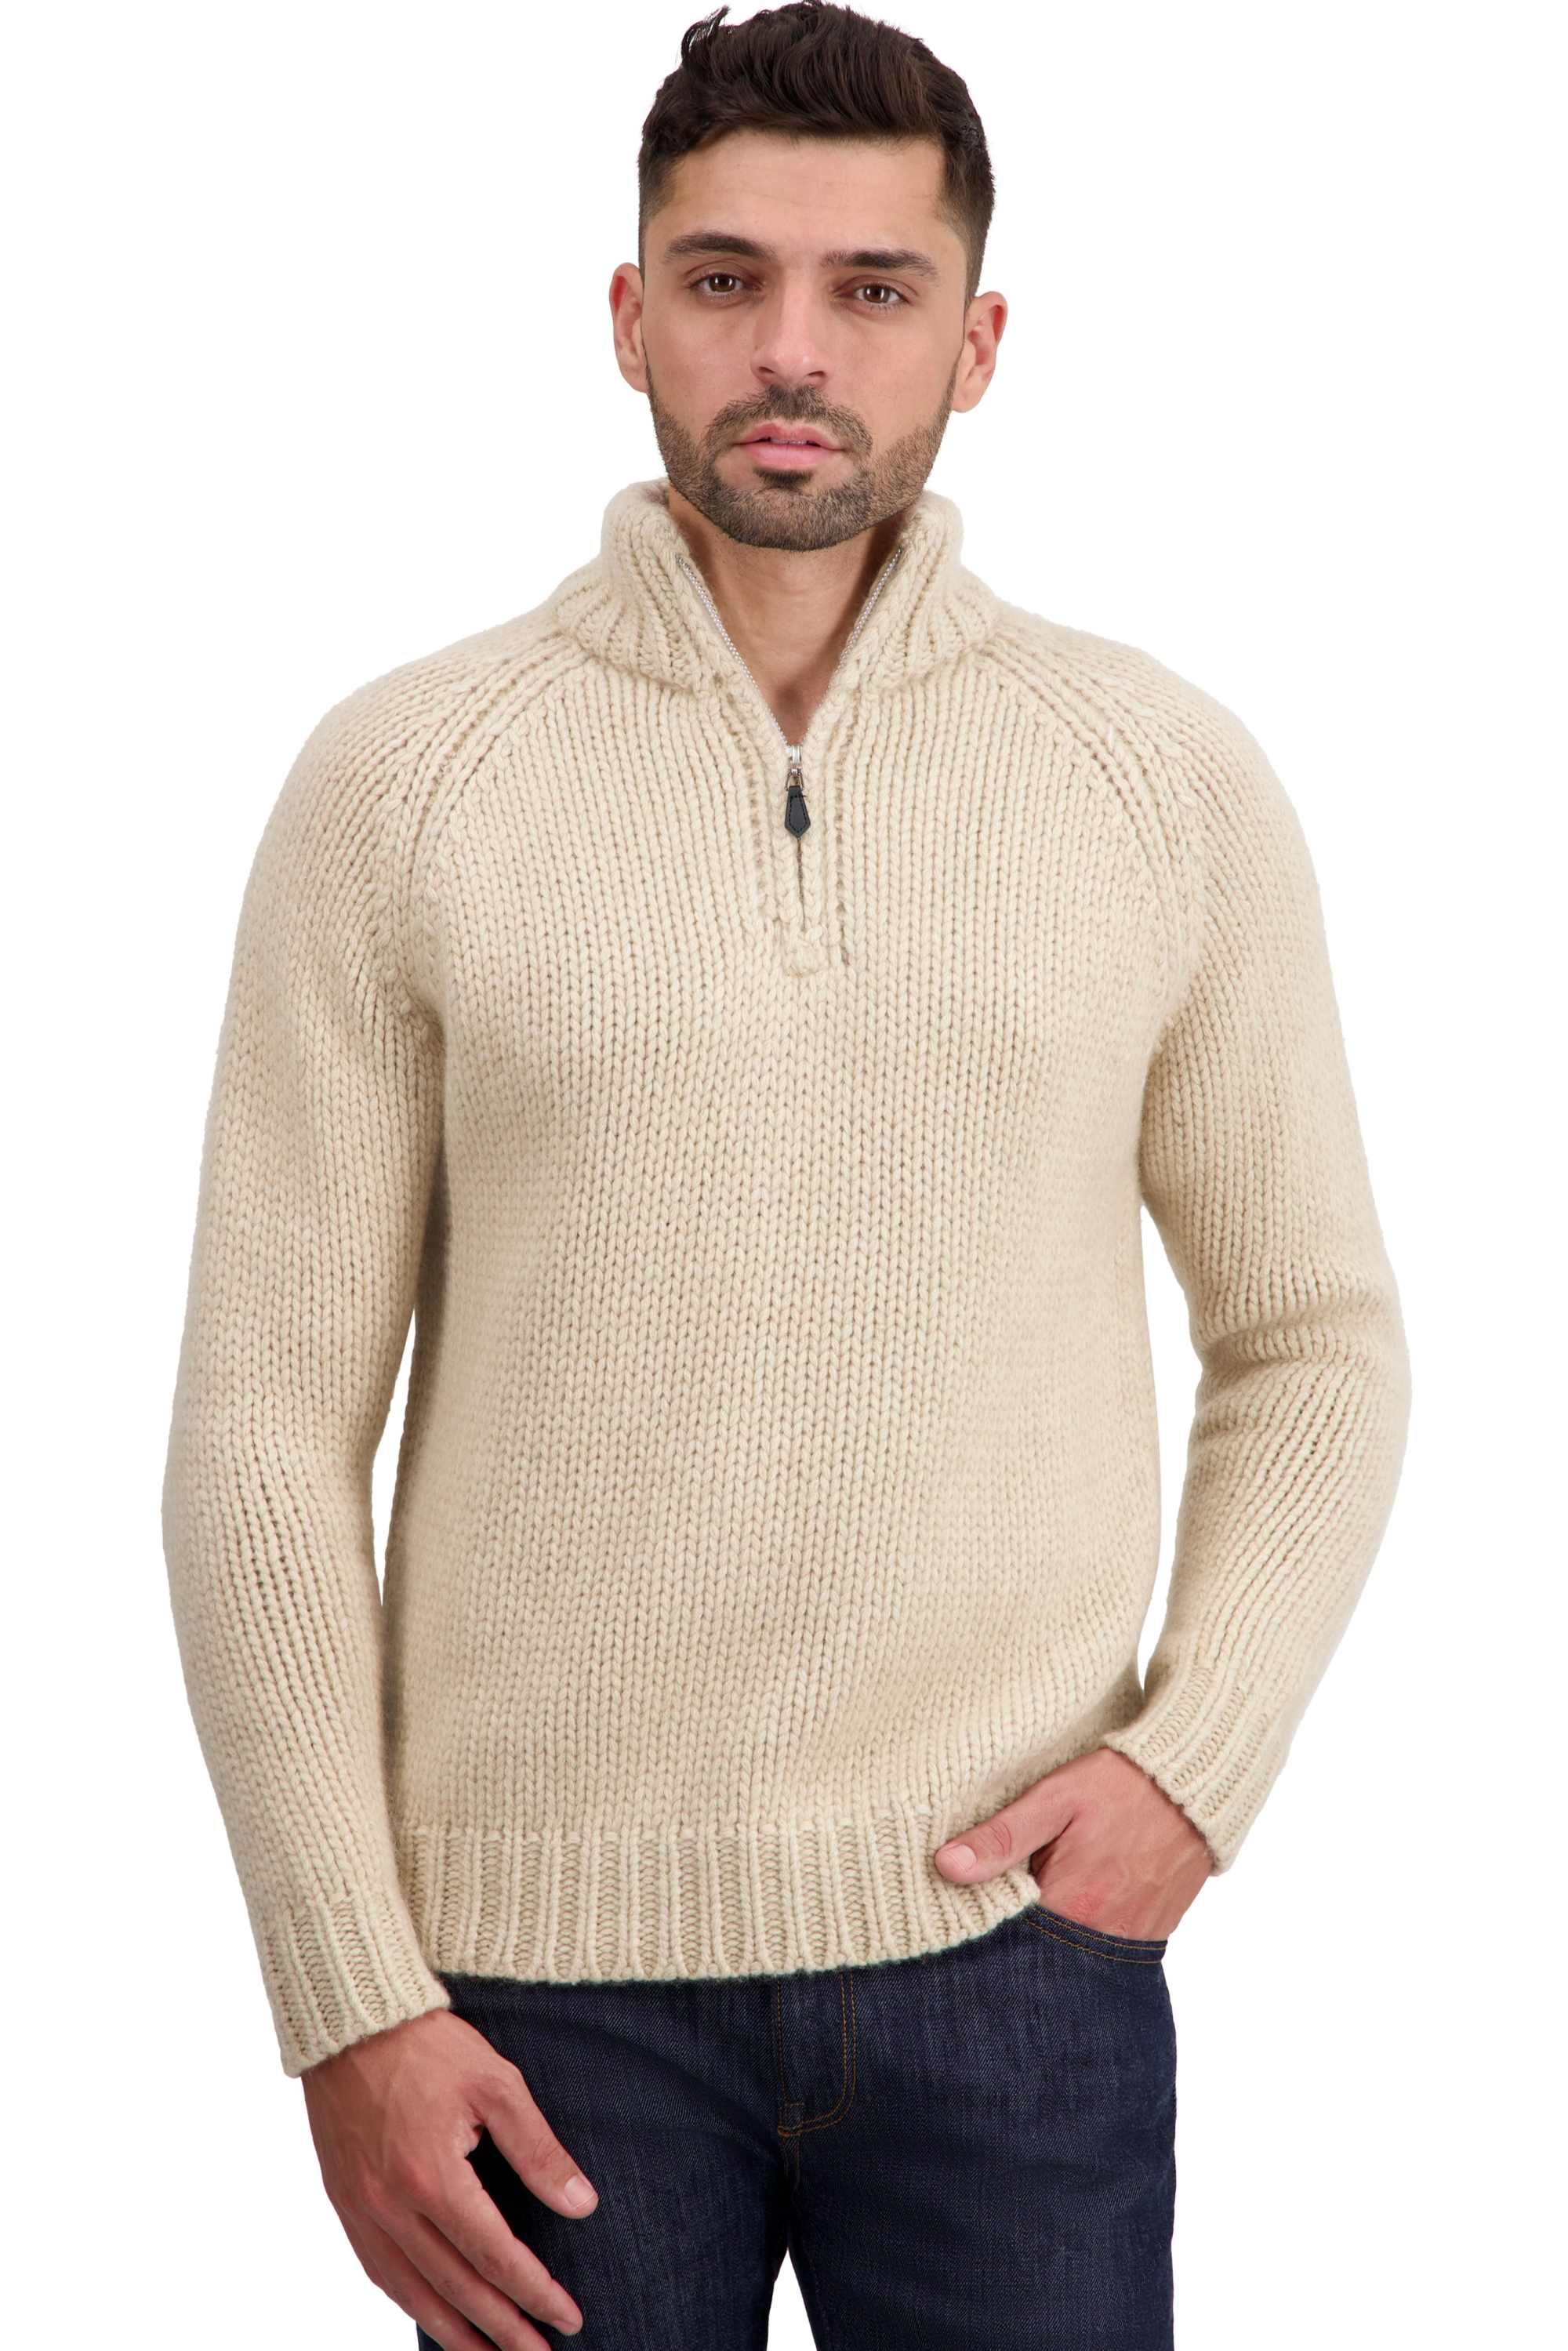 Cachemire pull homme tripoli natural winter dawn natural beige 2xl